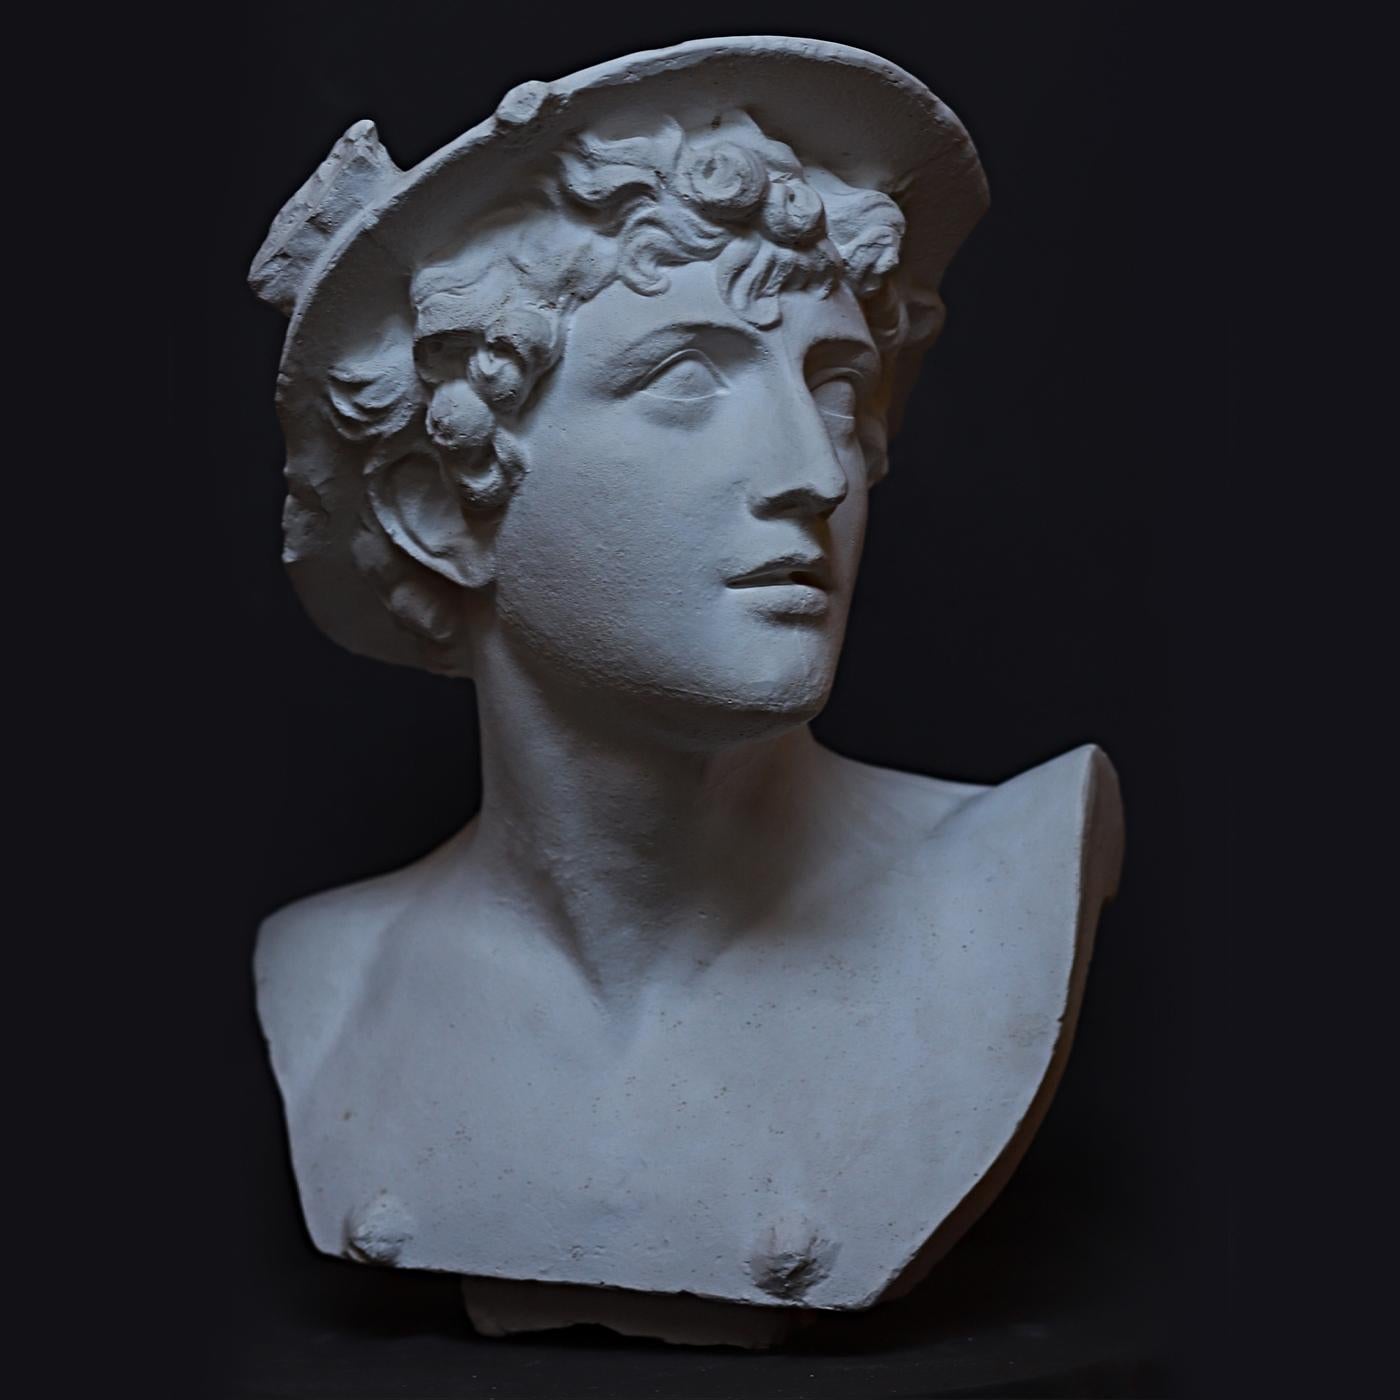 An extraordinary, renowned oeuvre of the Mannerist period, this stupendous bust depicts Mercury, or Hermes, the son of Zeus and nymph Maia who served as the messenger of gods in Greek mythology. Hermes was also the God of travel and travelers, of